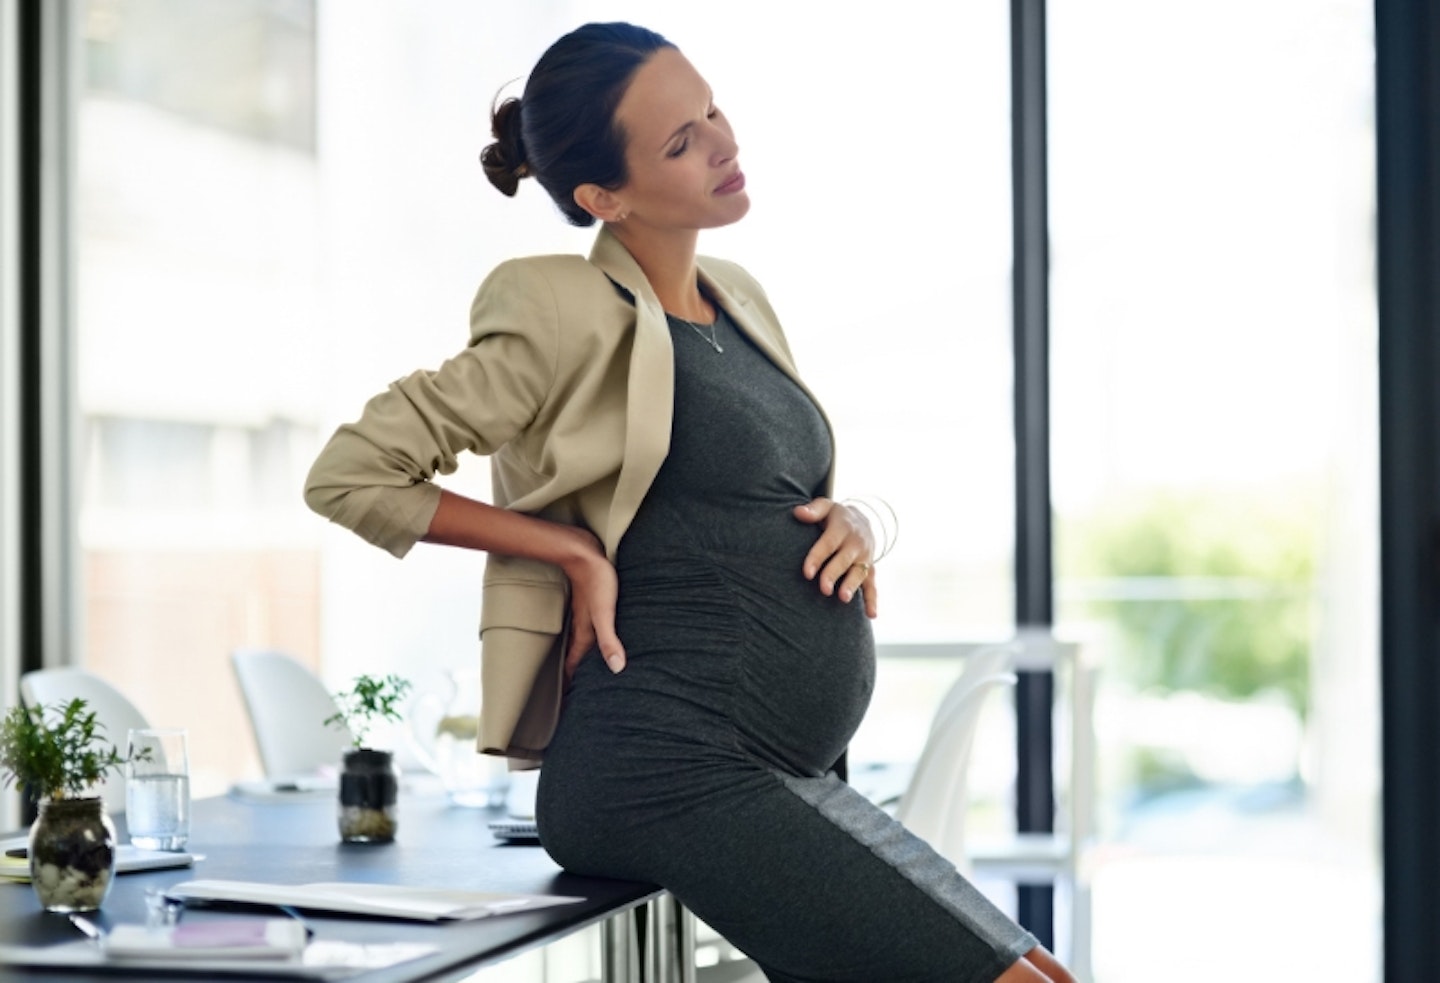 Round Ligament Pain During Pregnancy: Causes, Symptoms, Diagnosis